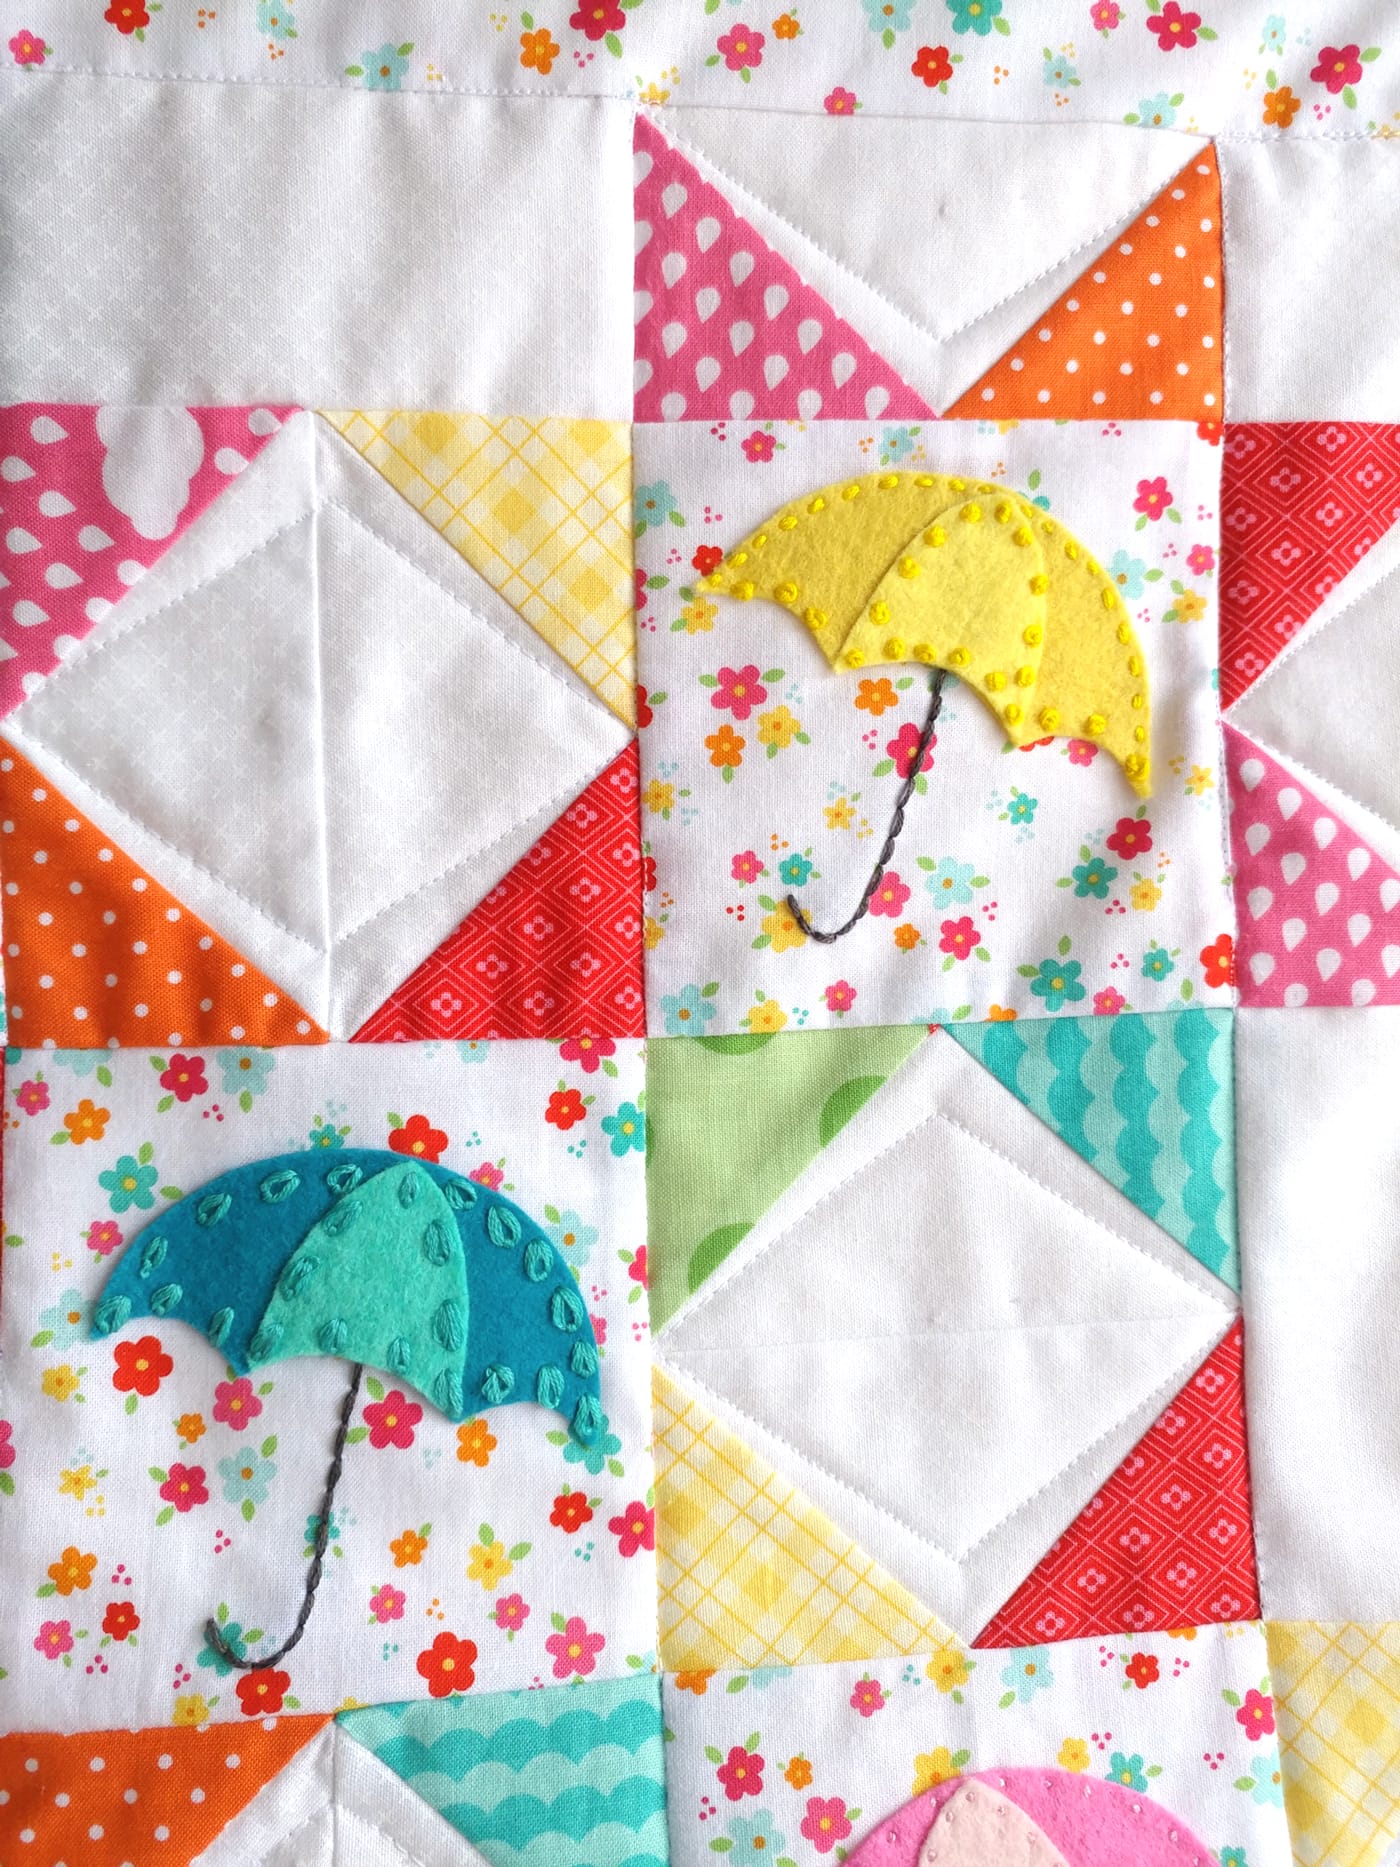 Free Springtime Showers Mini Quilt Pattern; would also be a cute DIY pillow for Spring. #miniquilt #miniquiltpattern